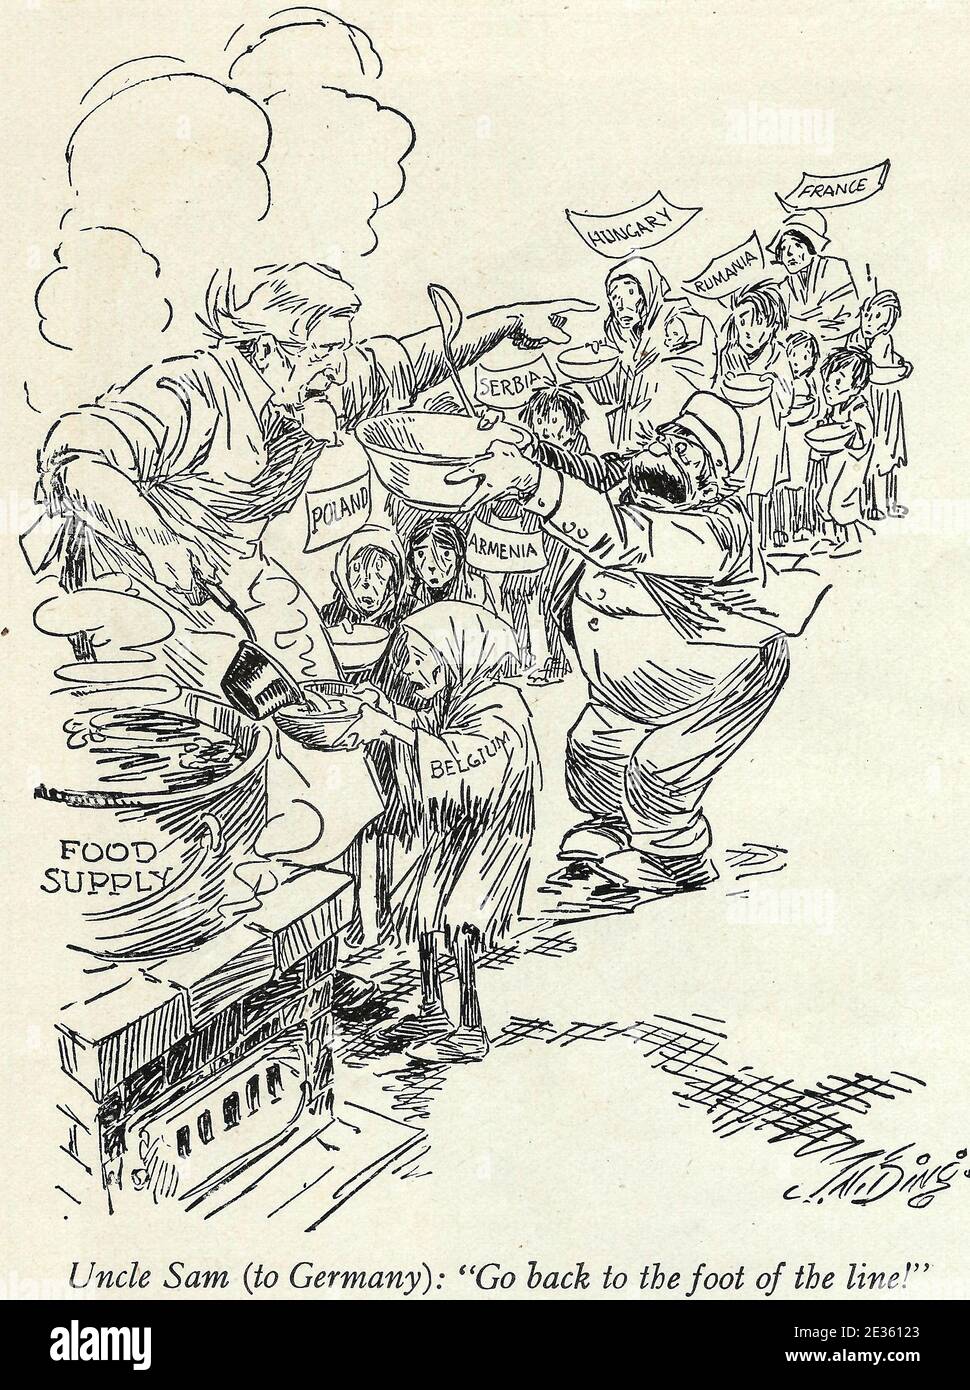 Uncle Sam (to Germany) - Go back to the foot of the line.  A political cartoon in the aftermath of World War I showing Germany trying to jump the queue for food relief - 1919 Stock Photo